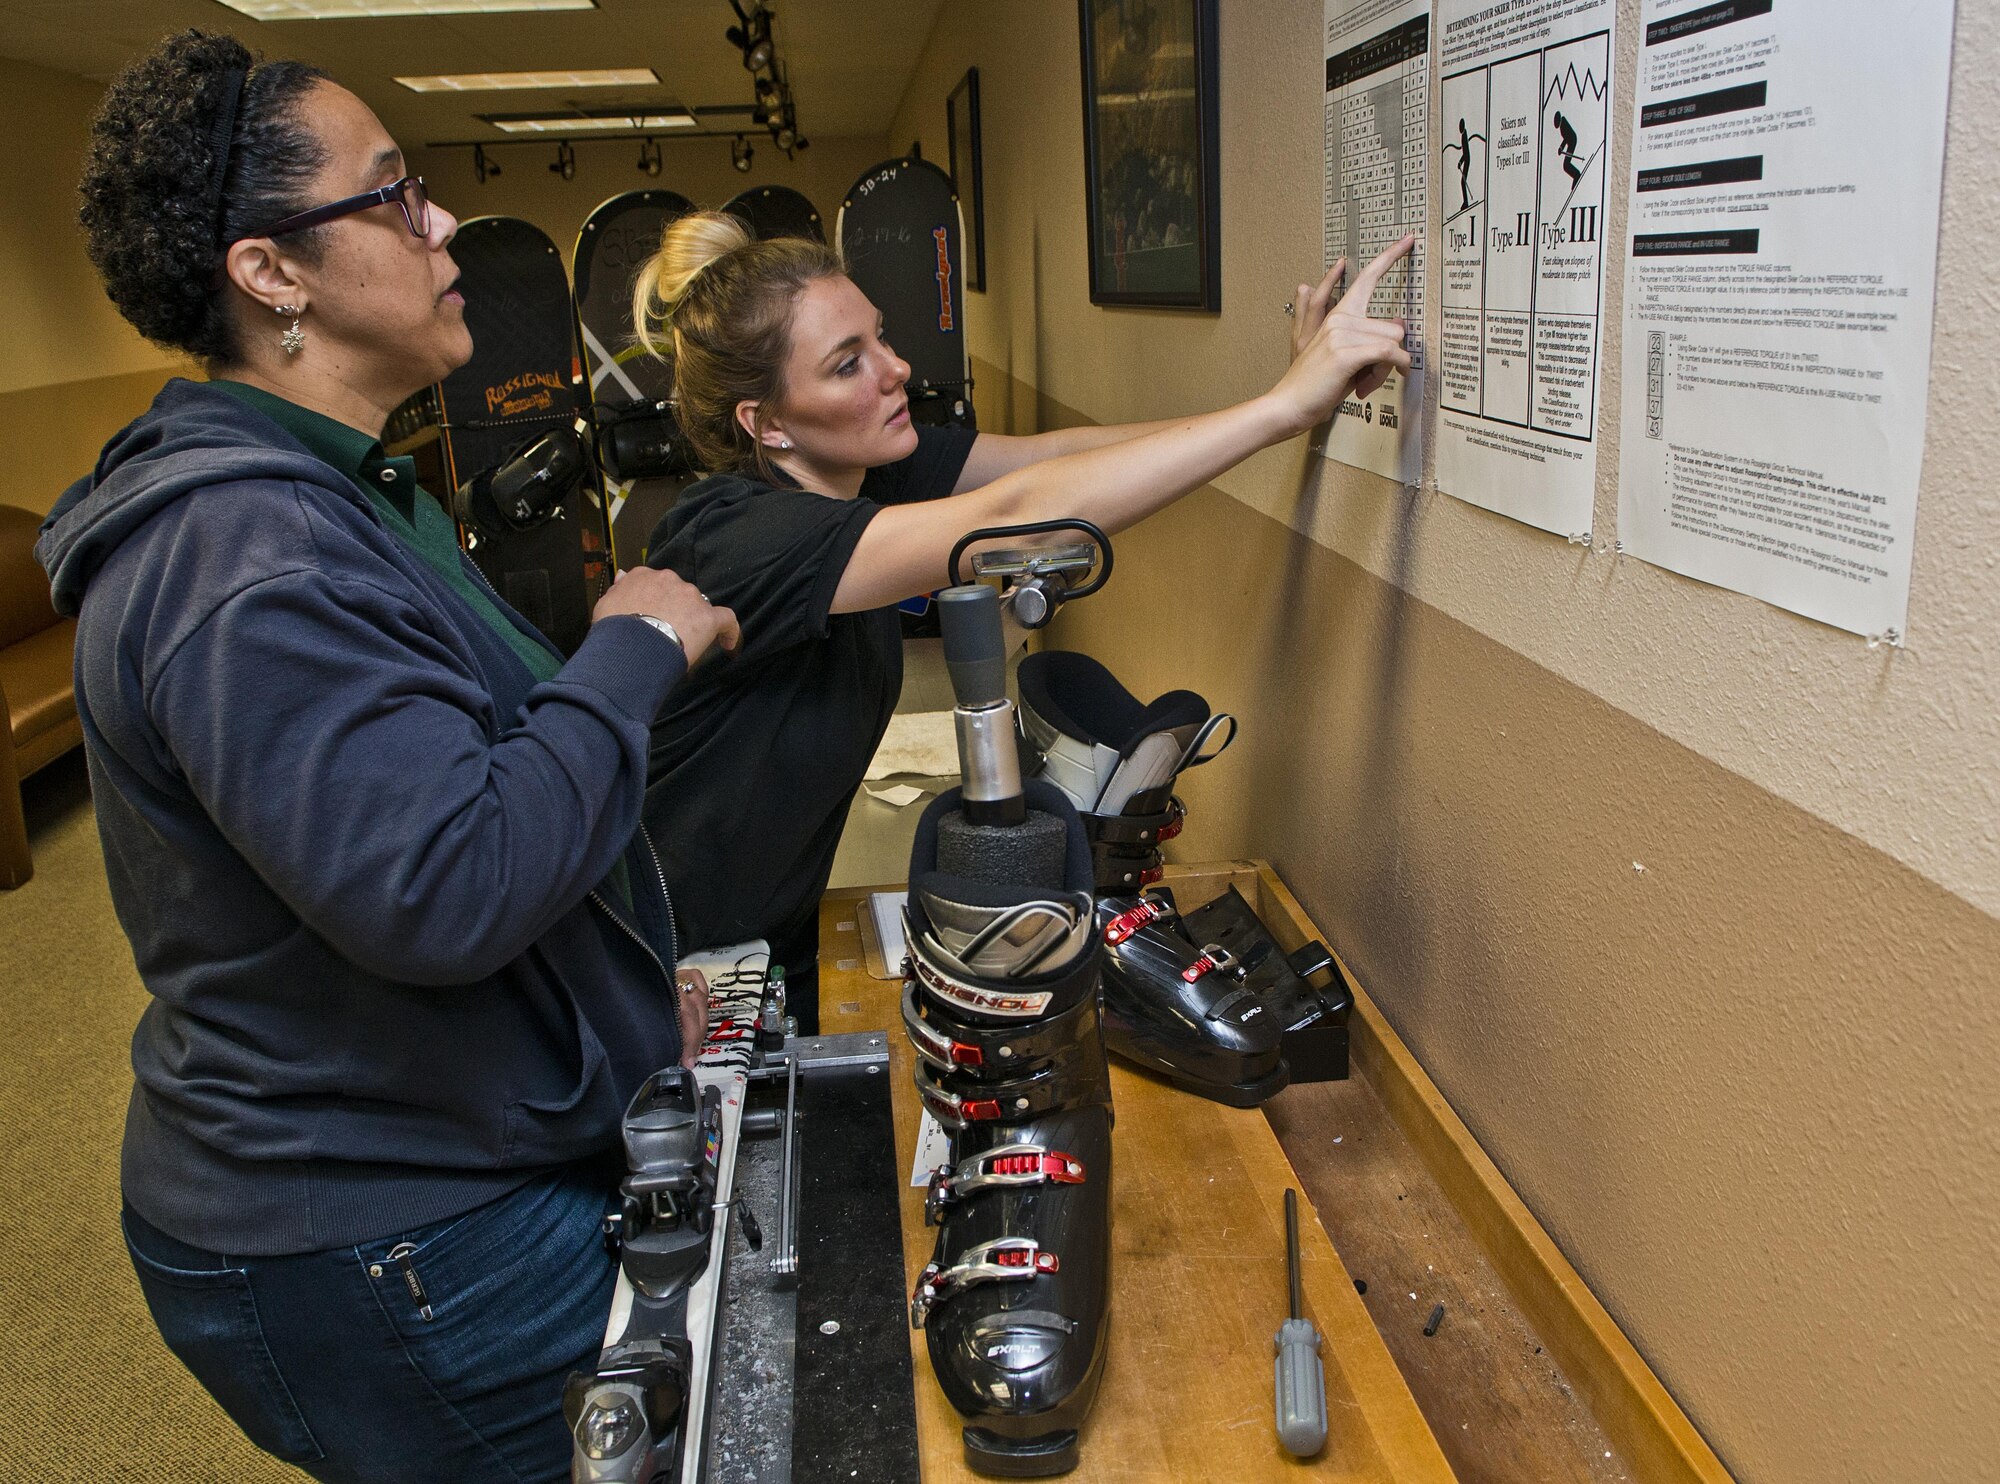 (From left) Dana Sharrit, 5th Force Support Squadron Outdoor Recreation associate, receives training from Ashley Shafer, 5 FSS Outdoor Recreation aid, at Minot Air Force Base, N.D., Dec. 2, 2016. Outdoor Rec. is an organization that gives Airmen and their families the opportunity to experience North Dakota events like skiing, snowboarding and dog sledding. (U.S. Air Force photo/Airman 1st Class Jonathan McElderry)